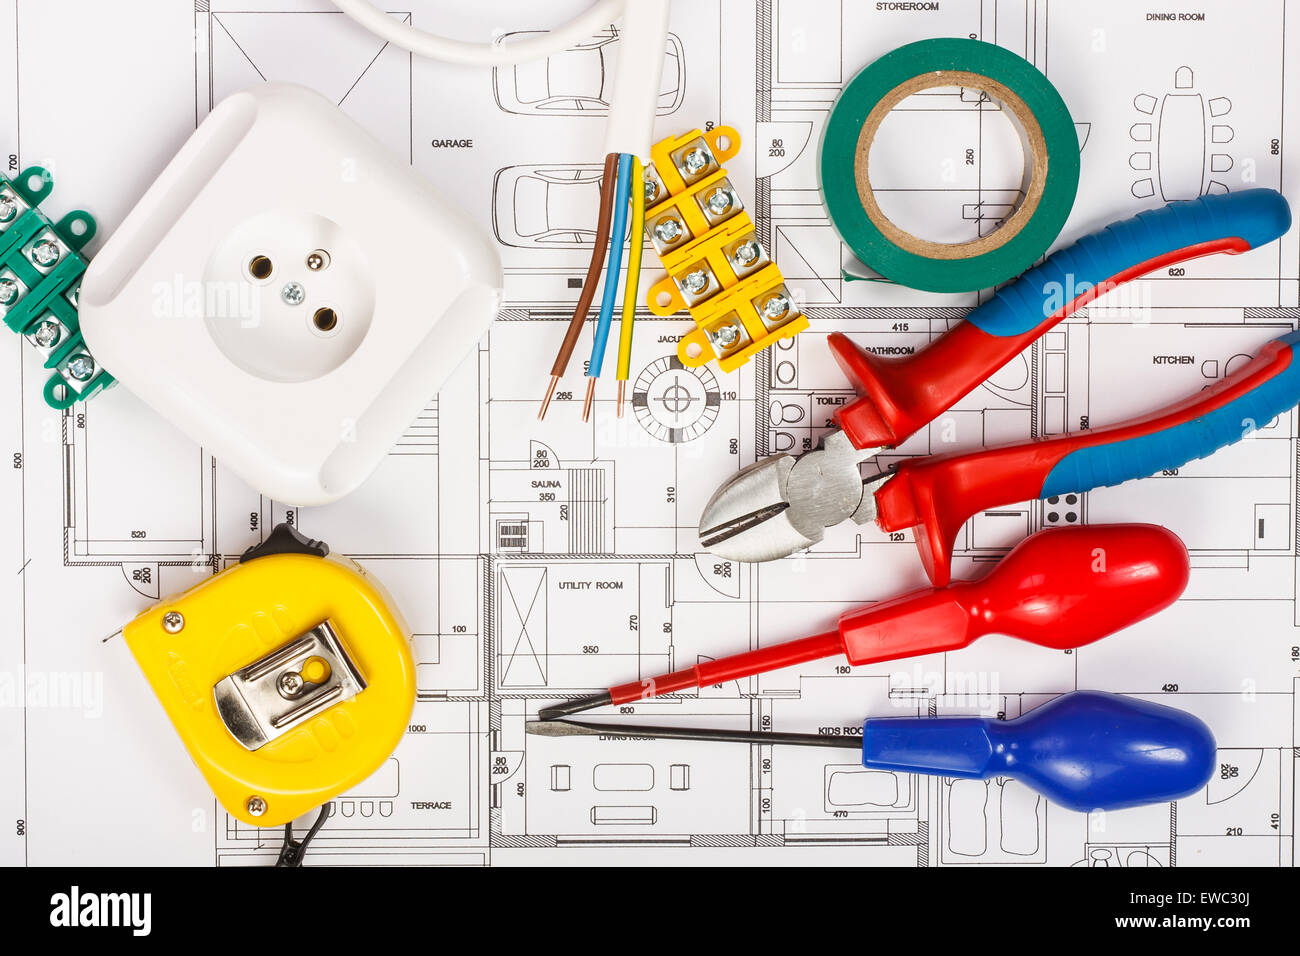 Electrical equipment and tools on house plans Stock Photo